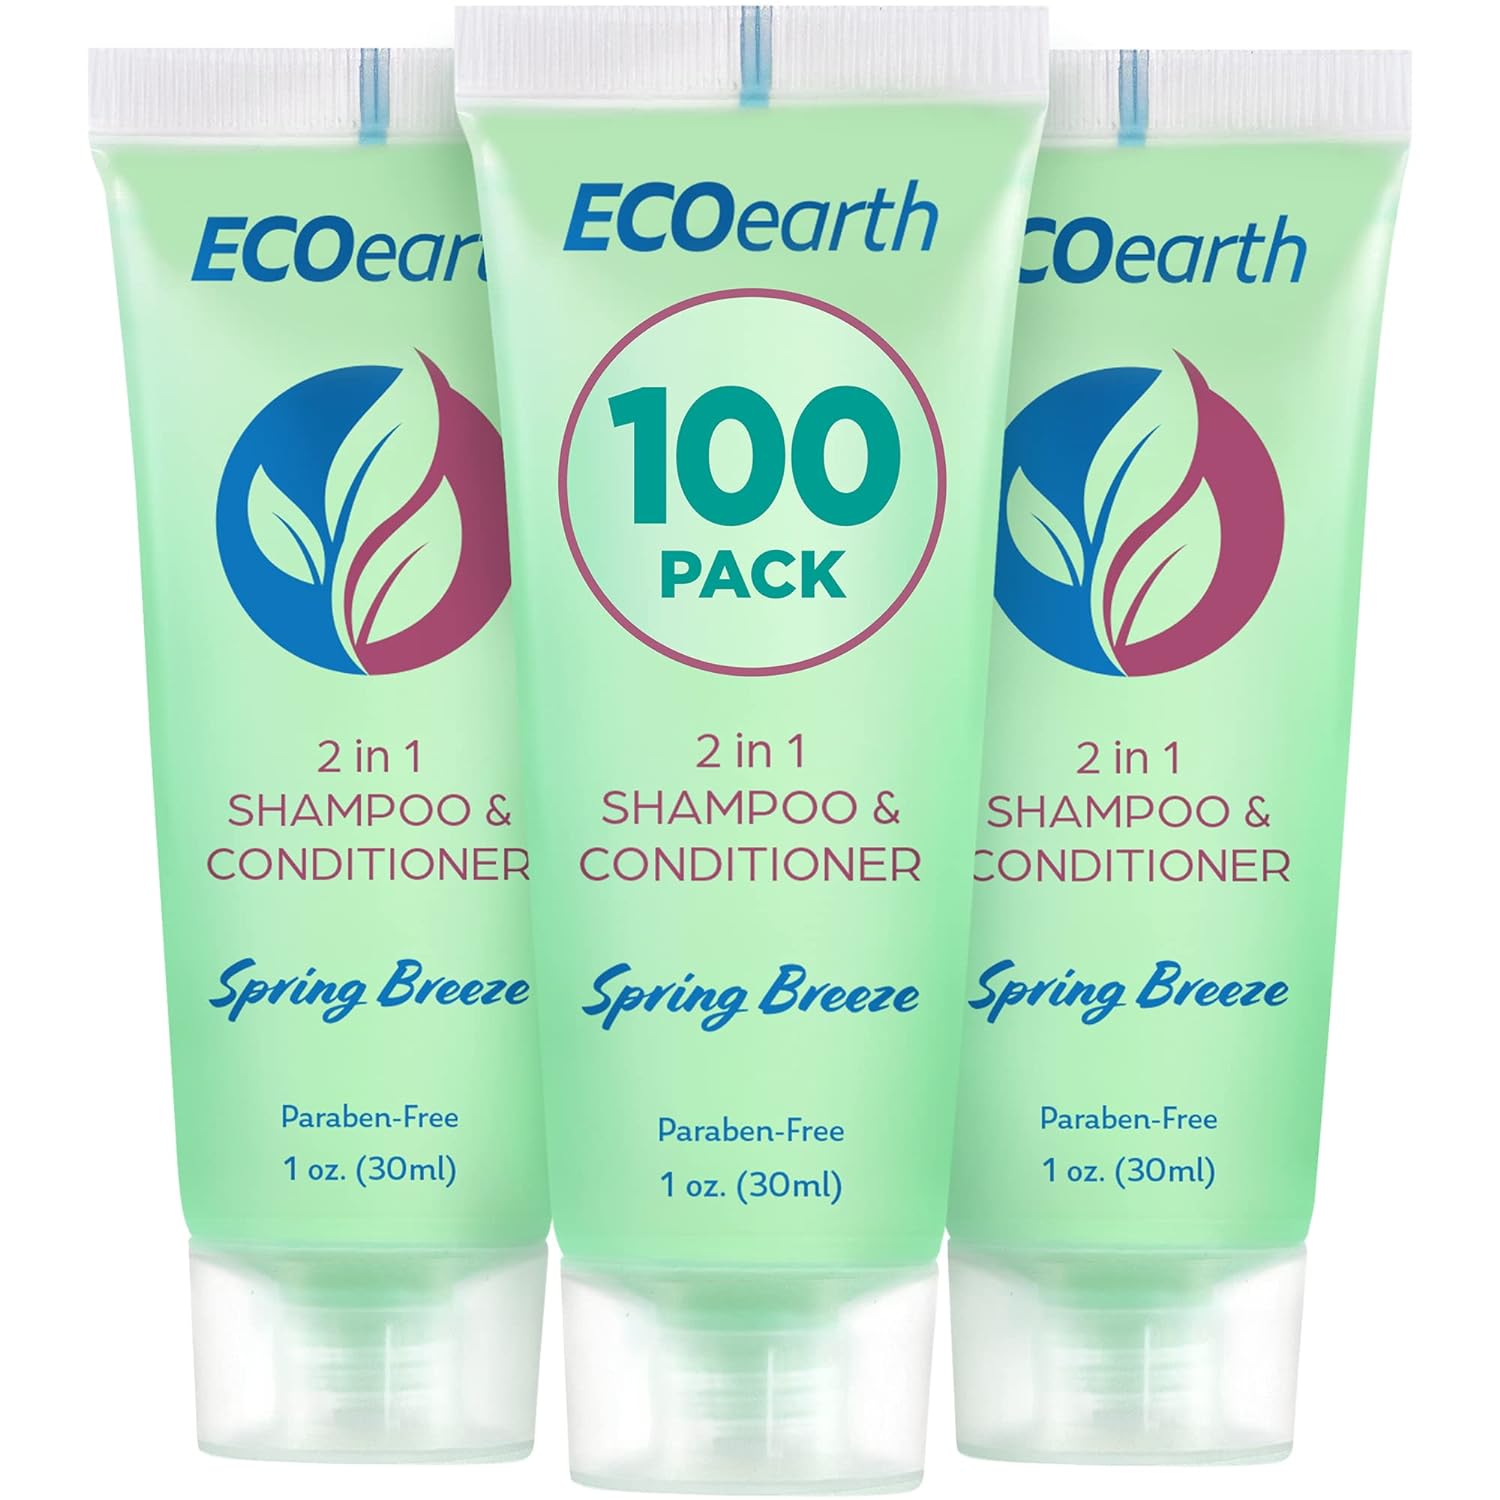 EcoEarth Travel Size Shampoo Conditioner 2-in-1 (1  , 100 PK, Spring Breeze) Delight Your Guests with Revitalizing & Refreshing Conditioning Shampoo Amenities, Small Size Hotel Toiletries in Bulk